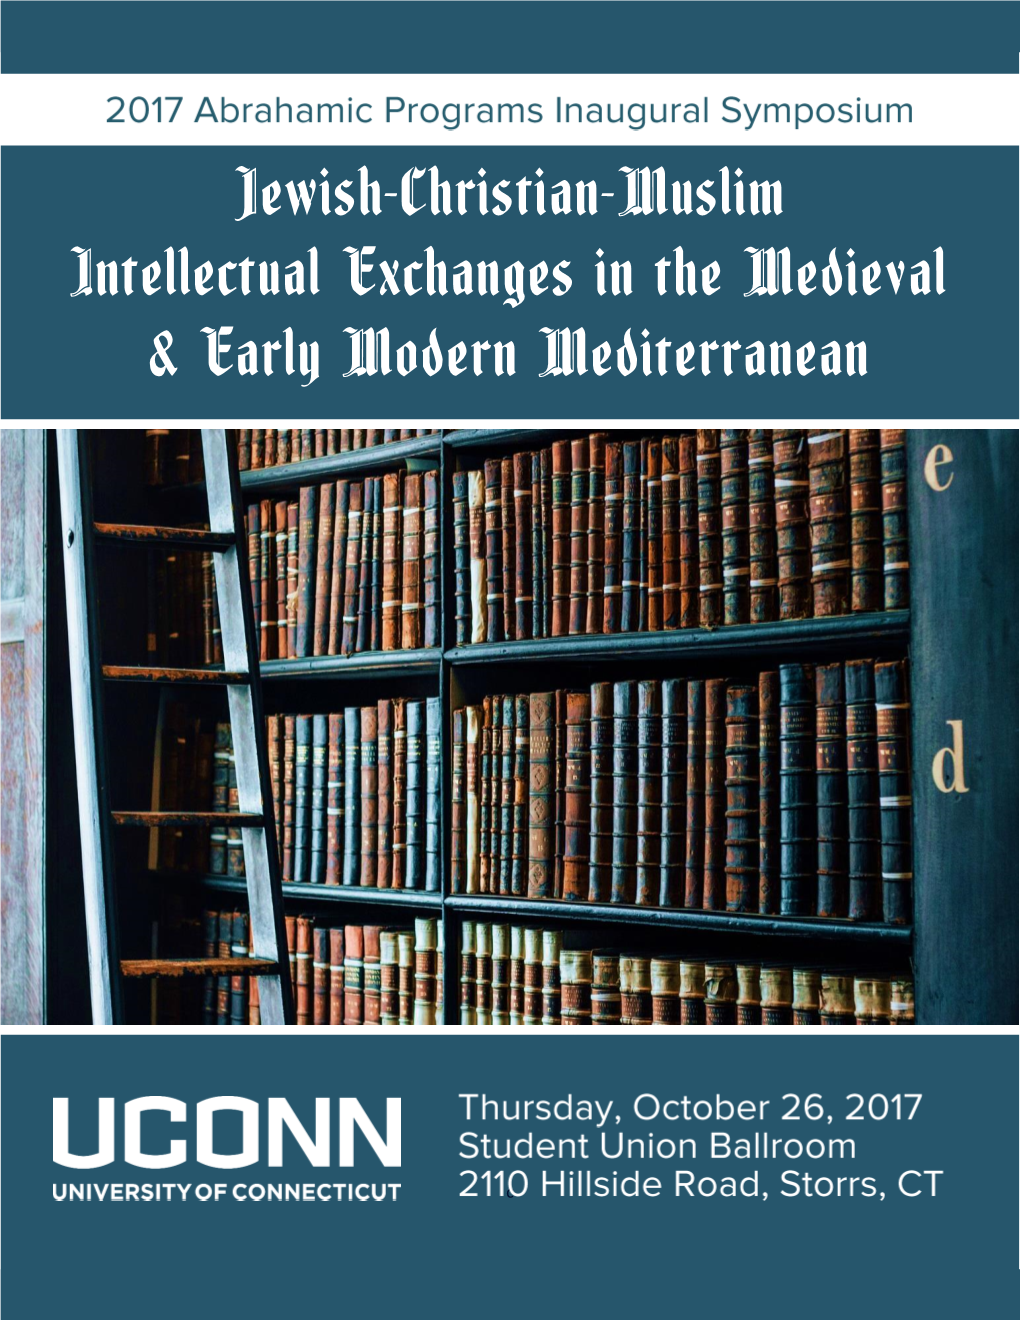 Jewish-Christian-Muslim Intellectual Exchanges in the Medieval & Early Modern Mediterranean